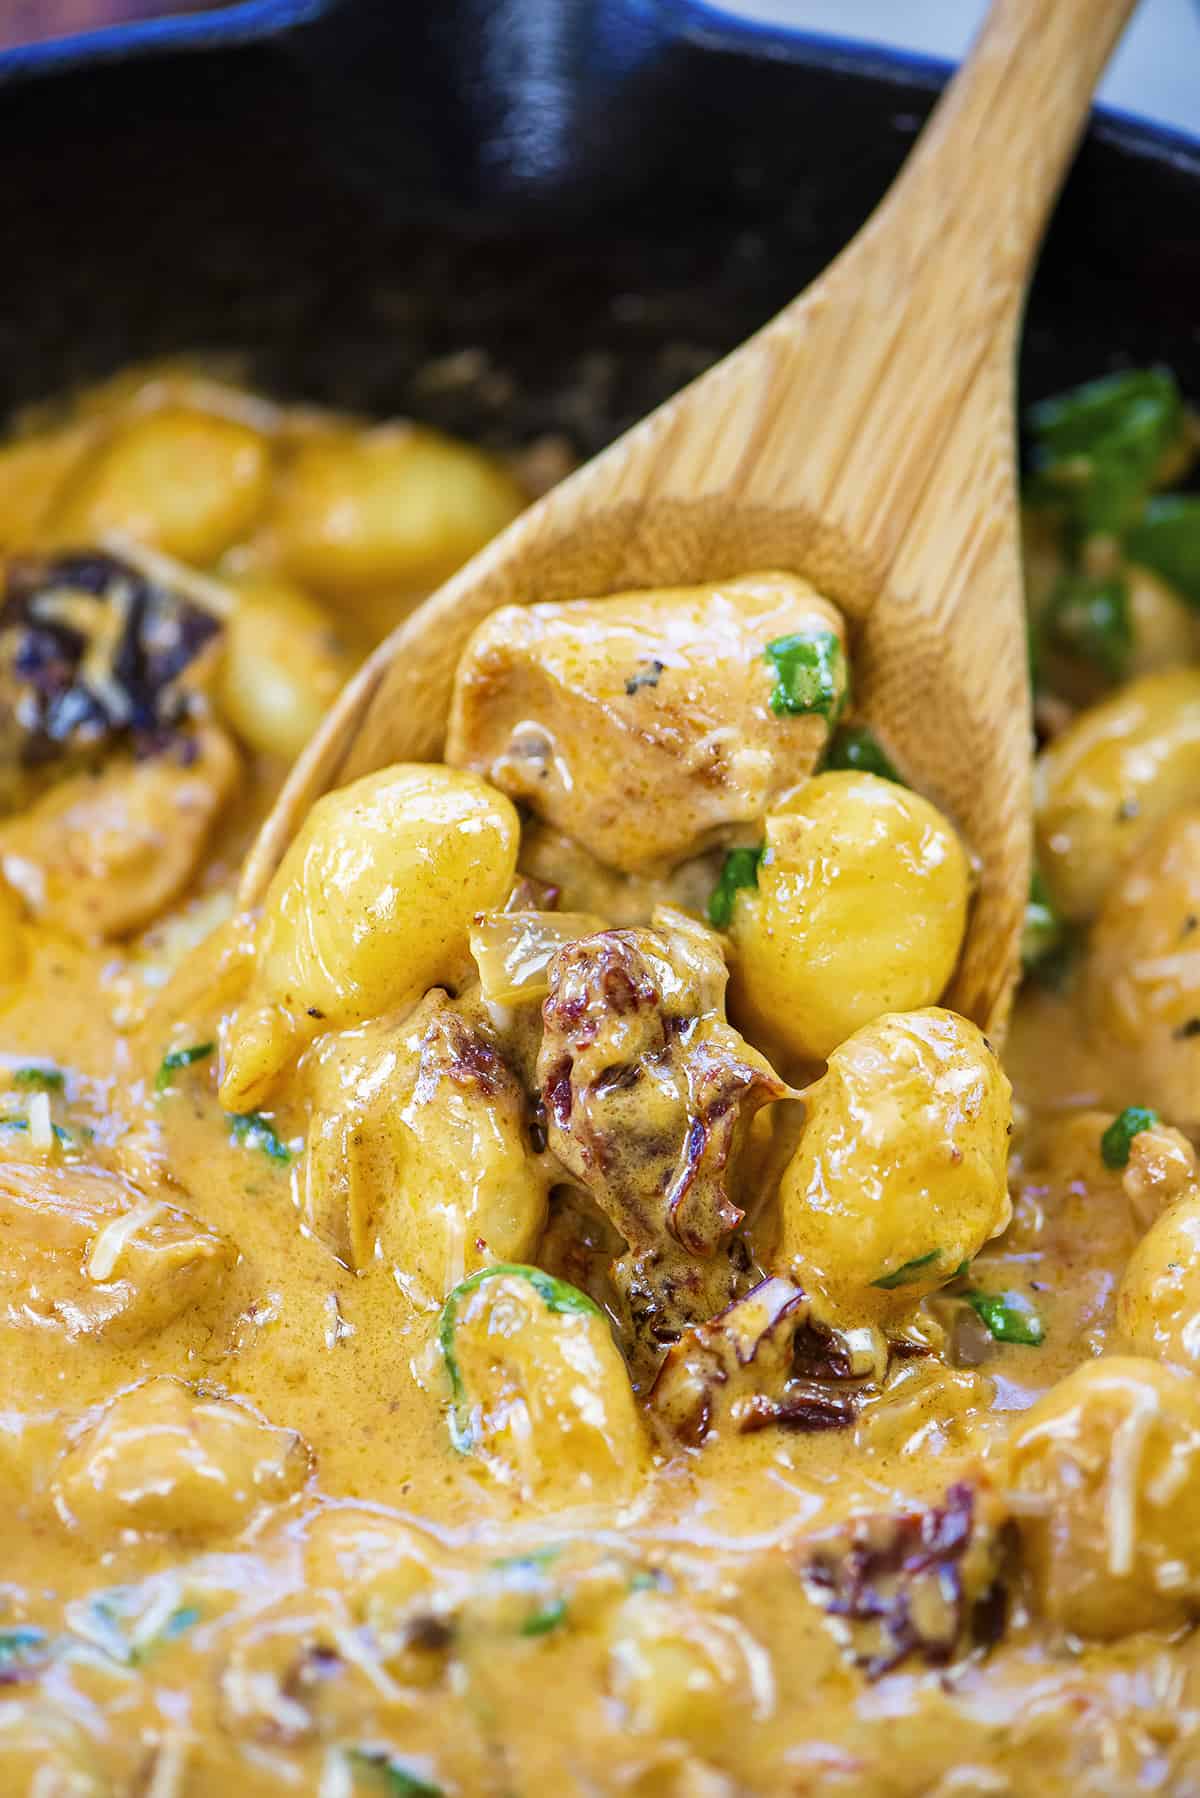 Wooden spoon loaded with chicken and gnocchi in cream sauce.